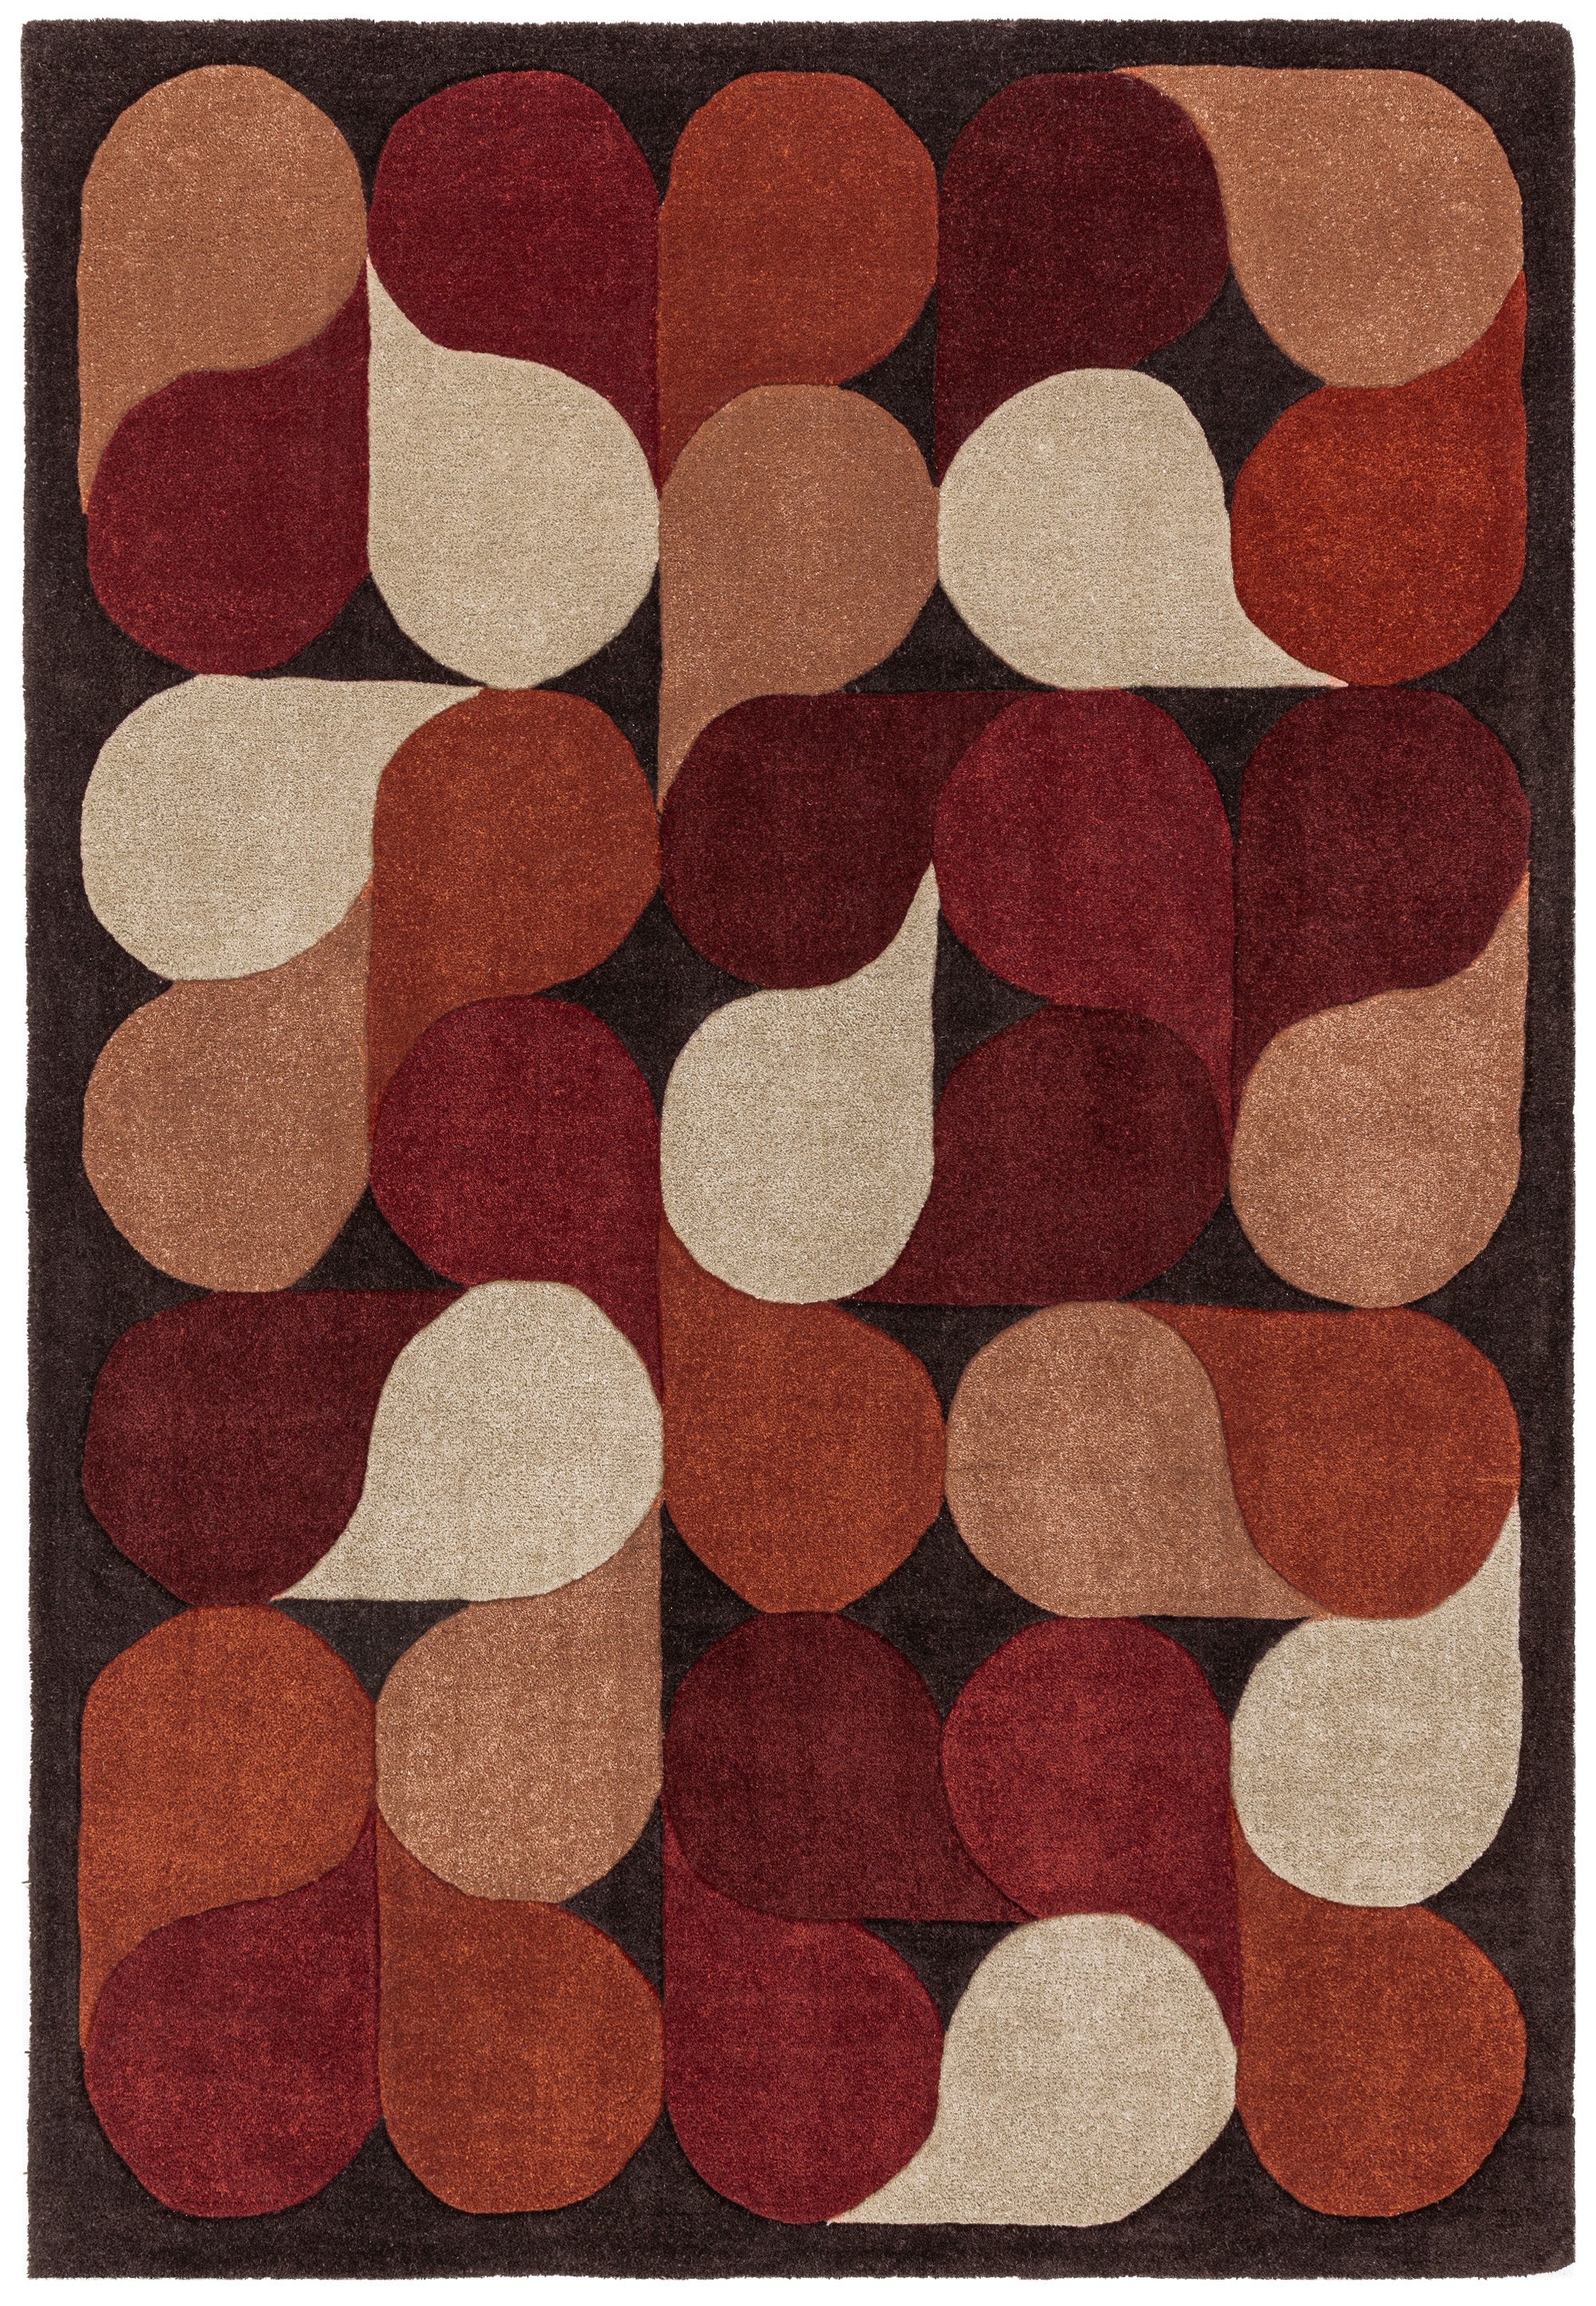 Red rug with an abstract pattern